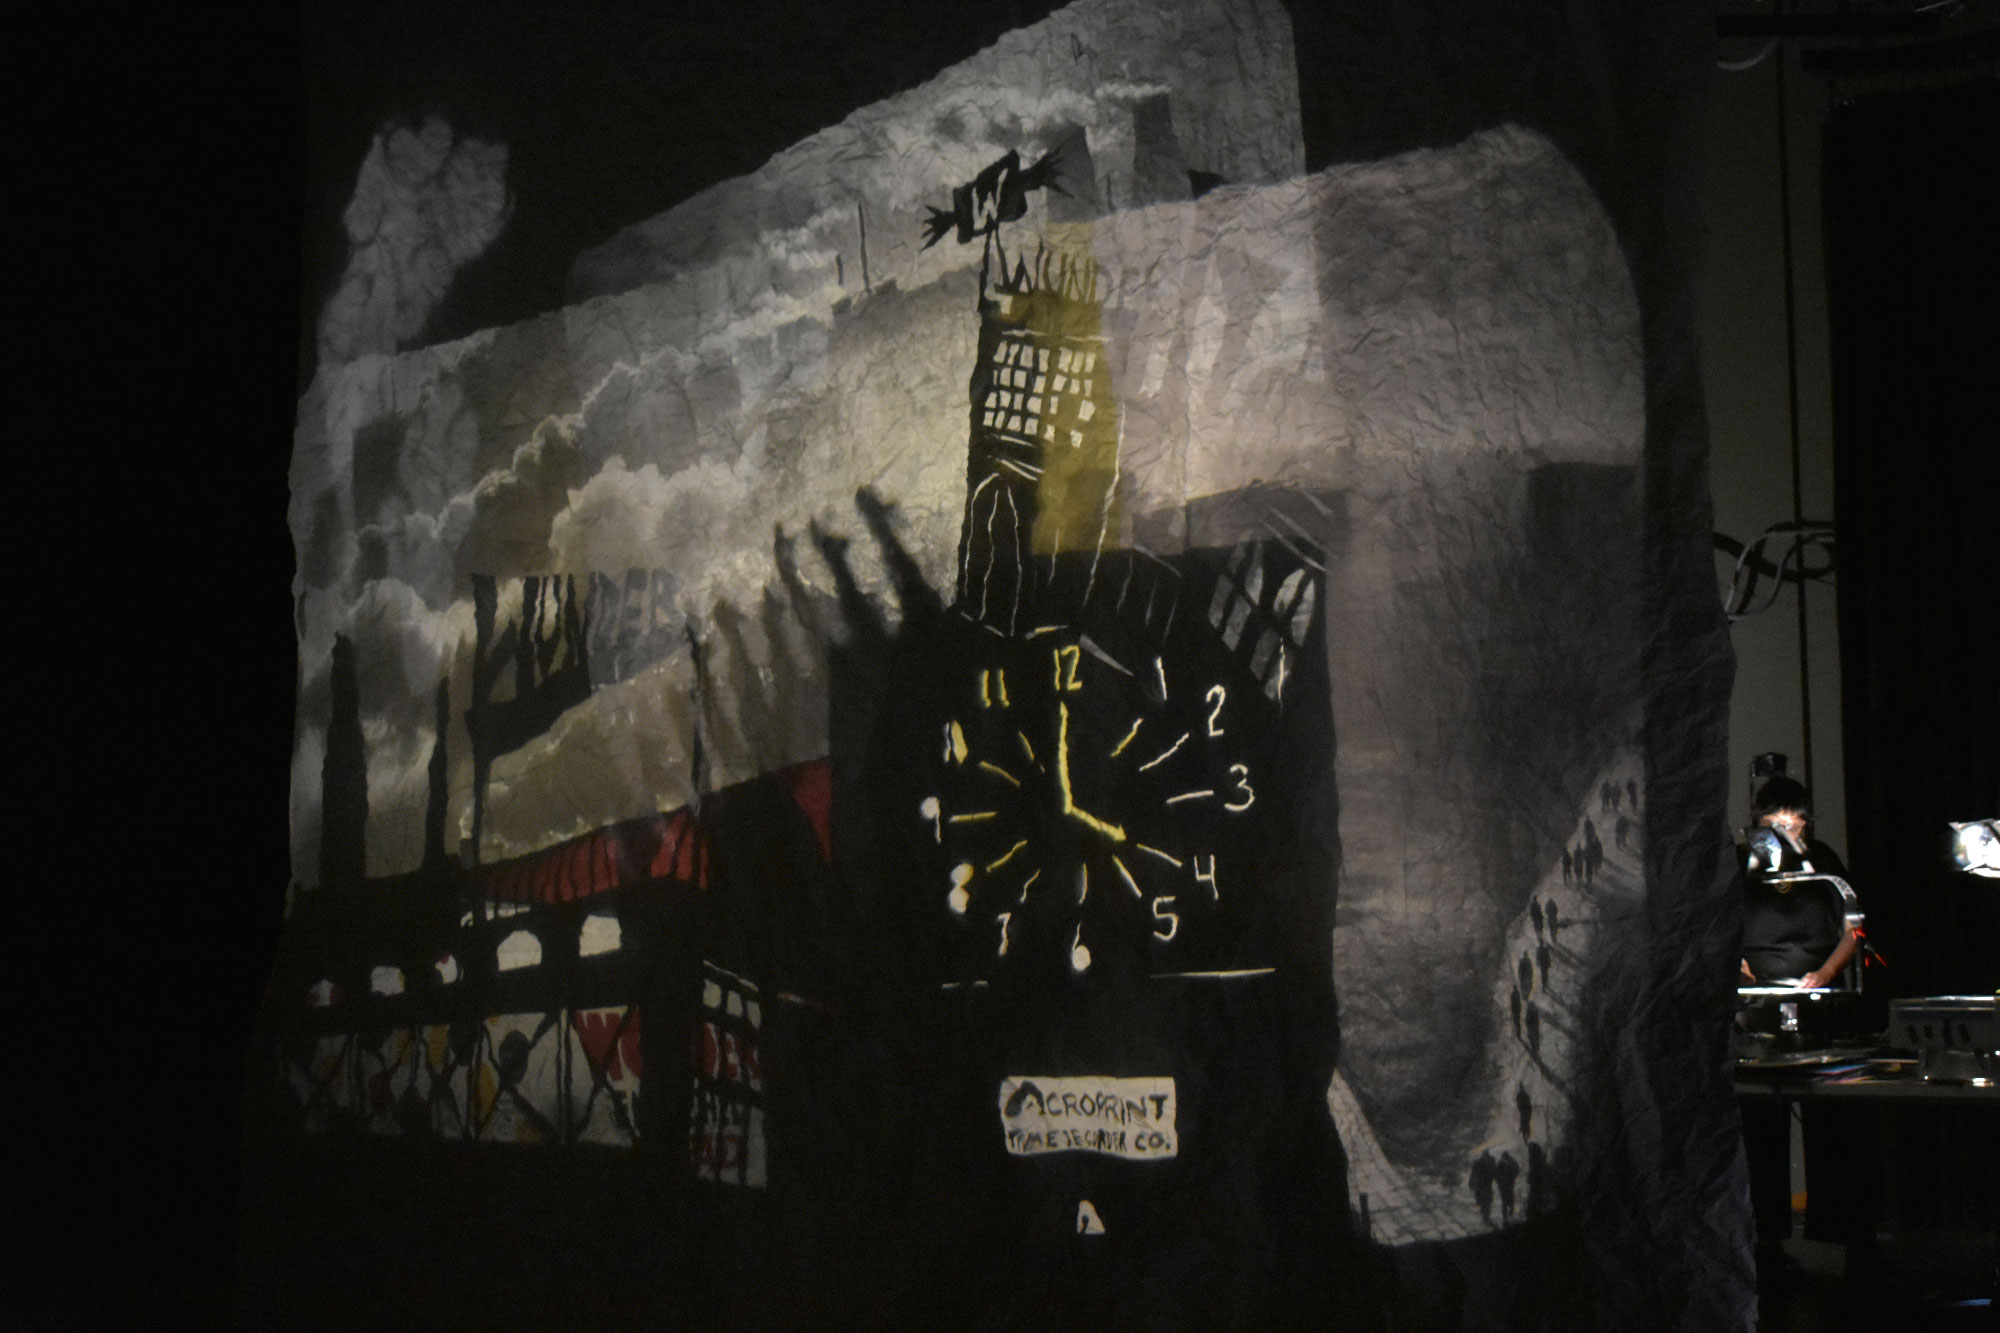 Projected images of clocktower on scrim with person looking down on overhead projector behind